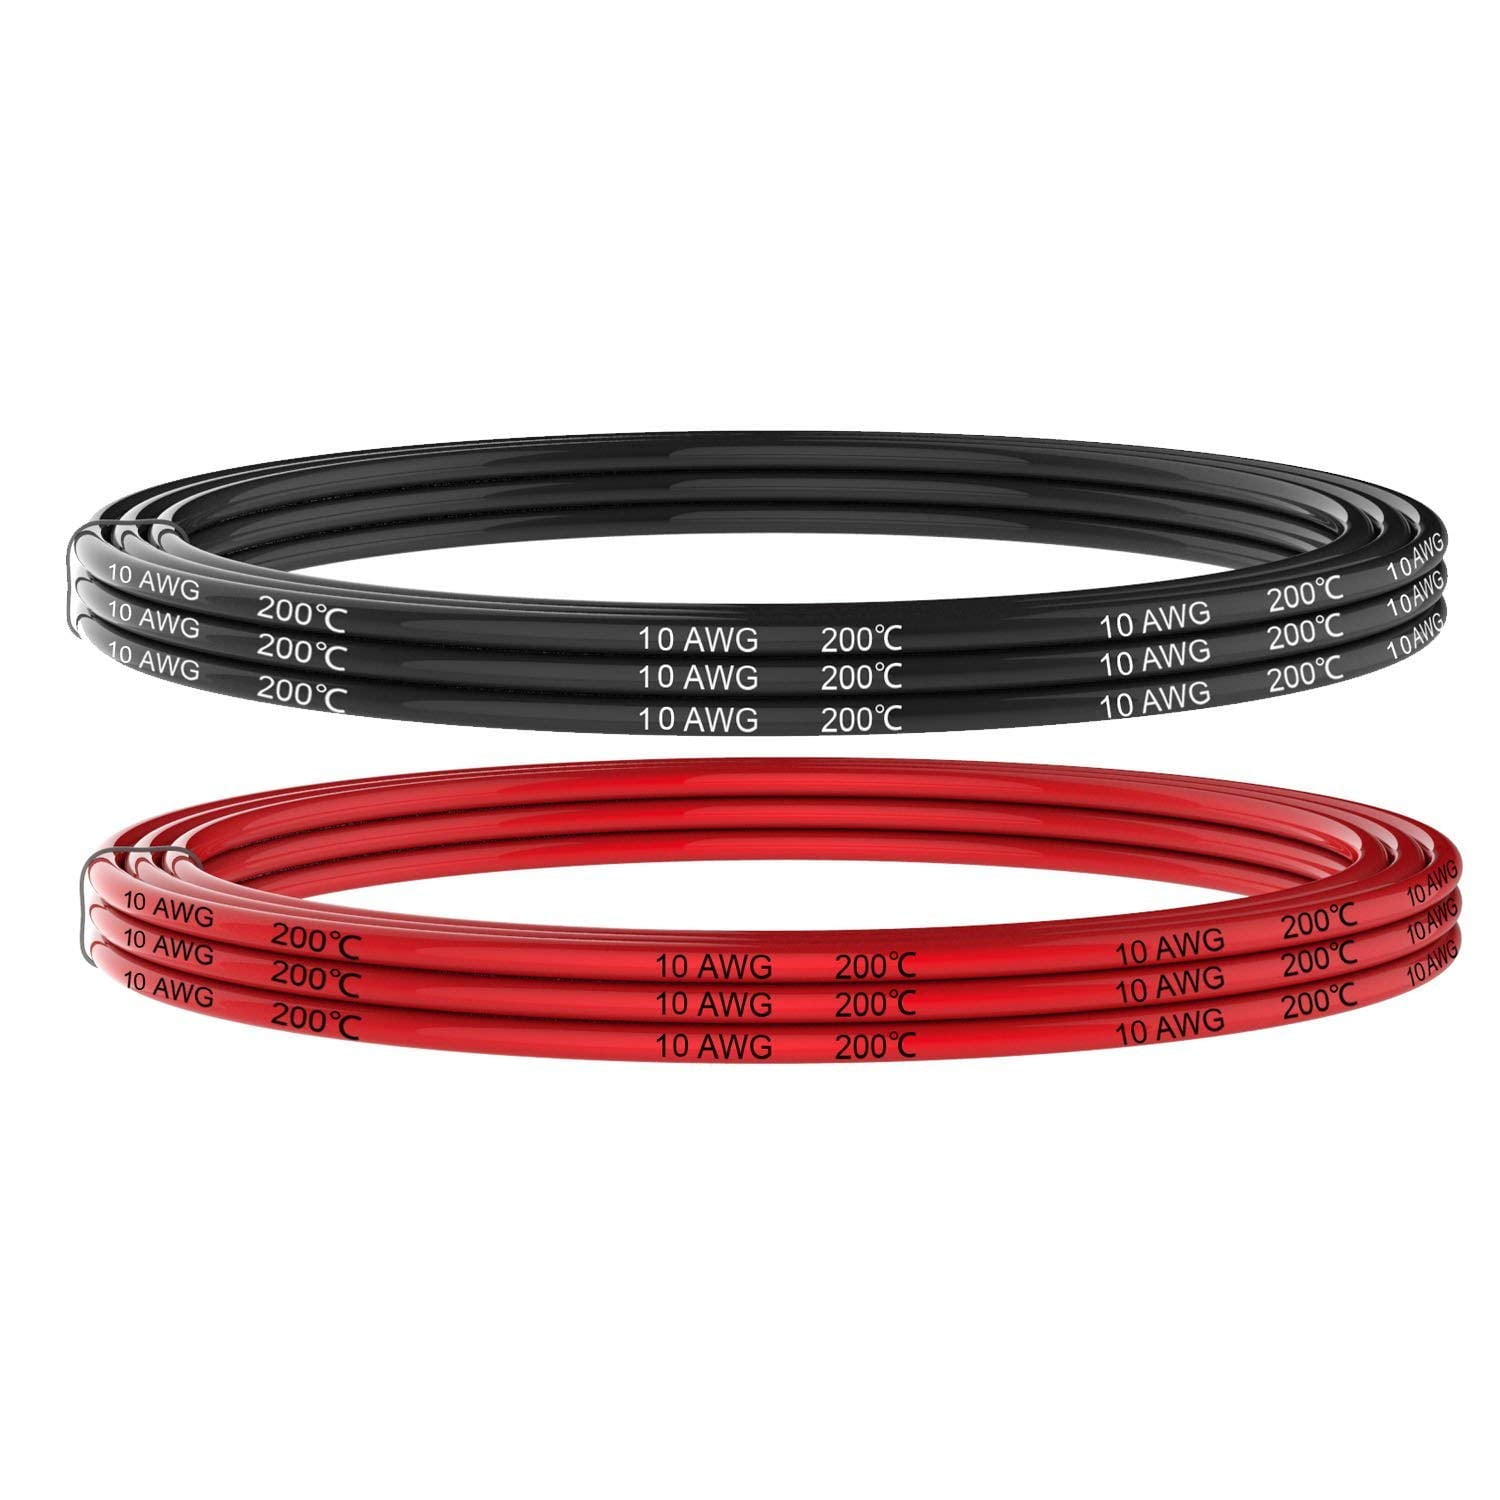 Silicone Wire 10 AWG 6ft Total,3 ft Red and 3 ft Black UTUO Red Black 200℃ 600V High Temperature Resistant Tinned Copper Soft Flexible Wire JUTUO 